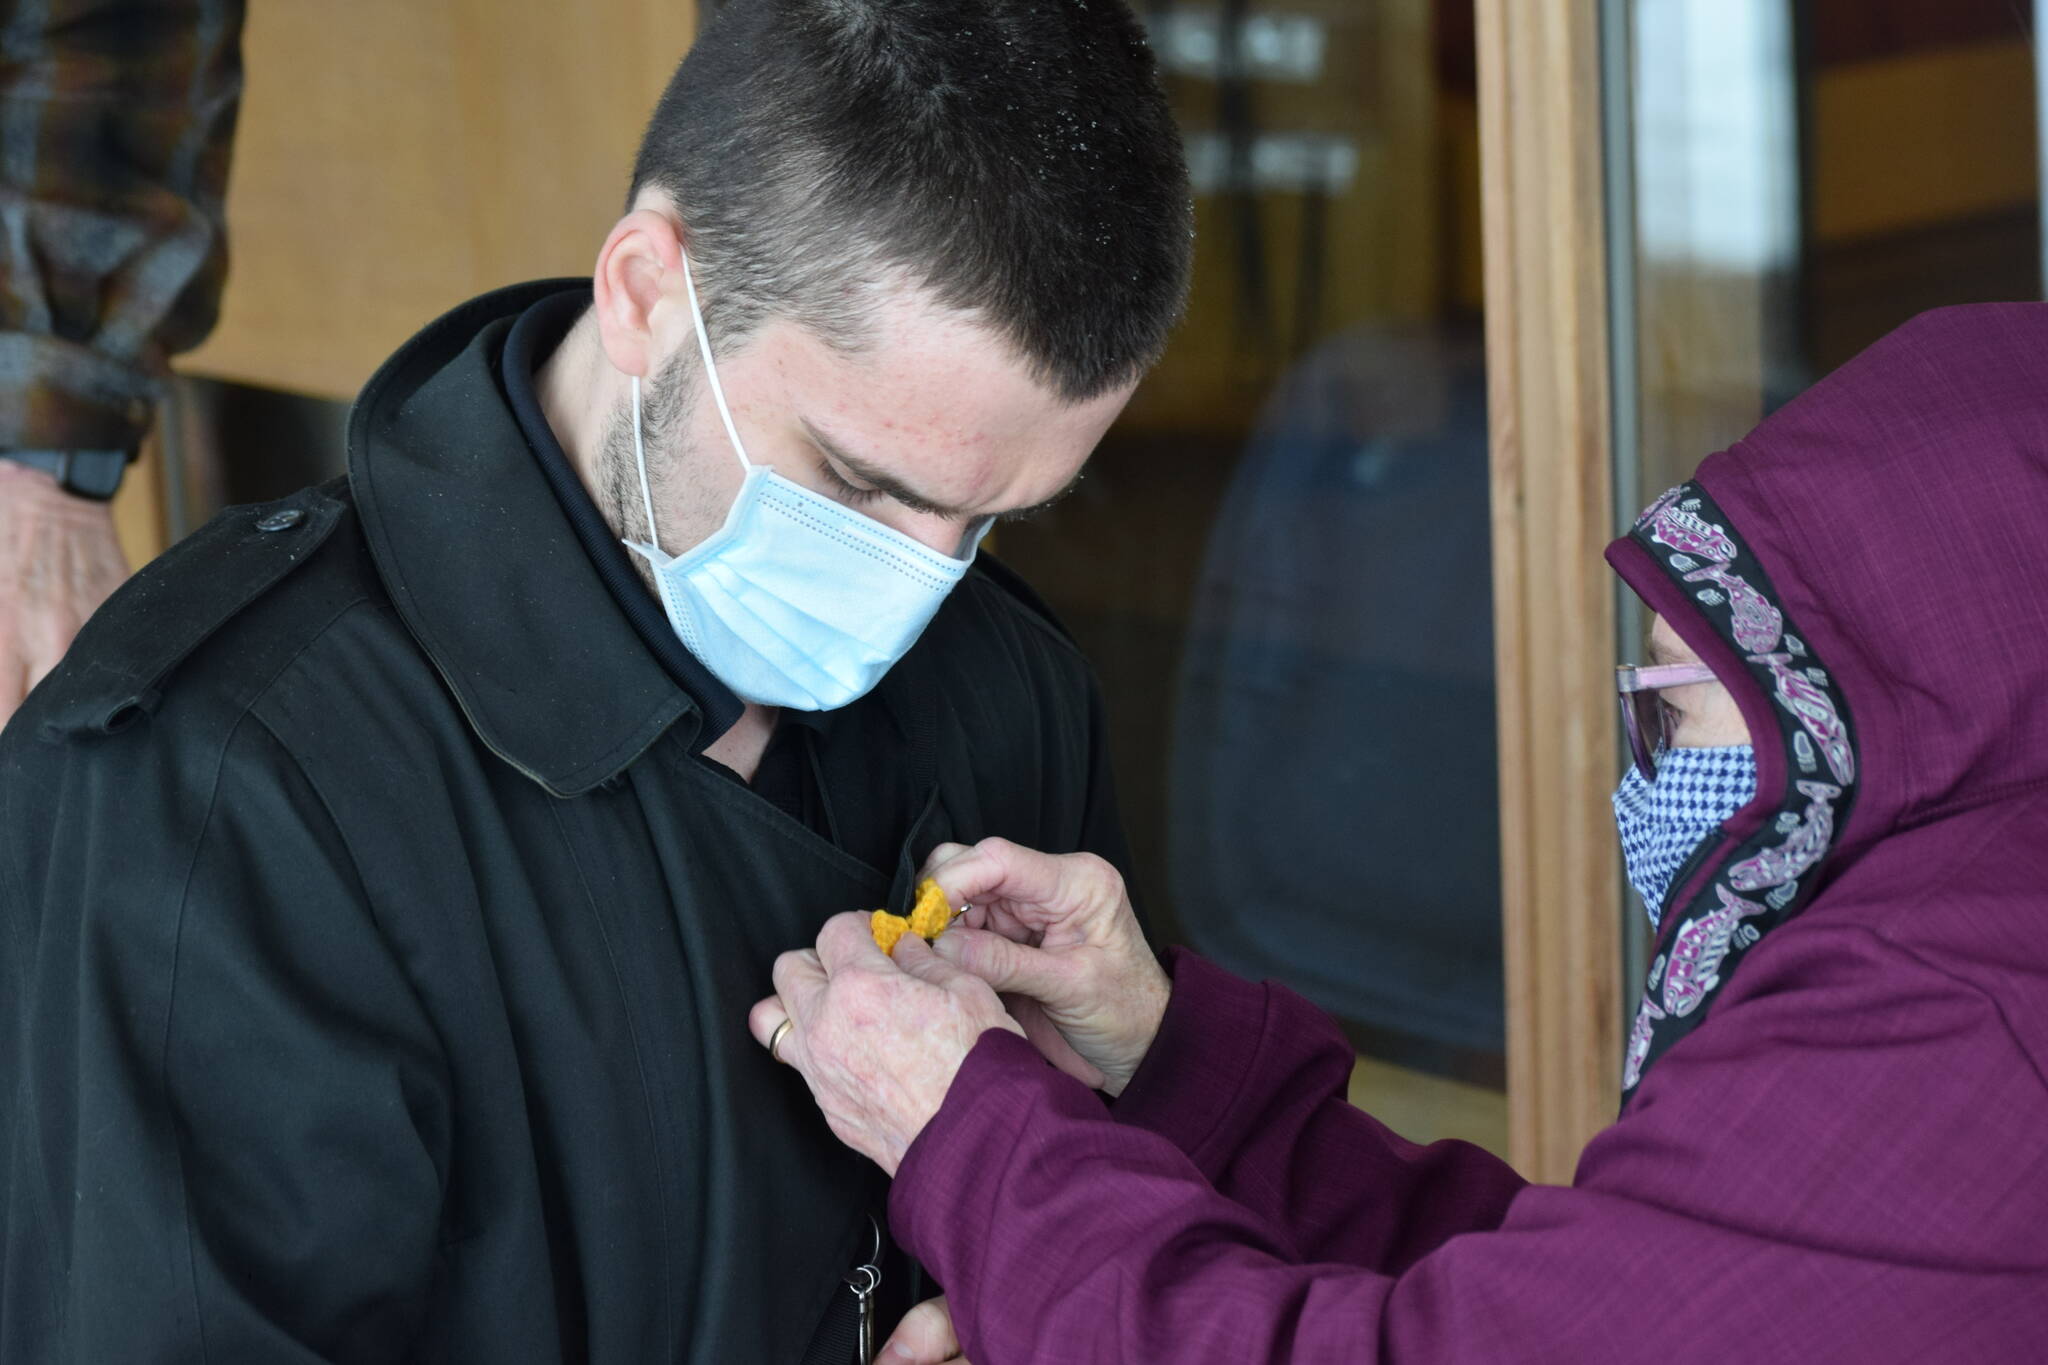 Kim Keck gives James Redmon a crochet sunflower pendant during the Many Voices Ukraine vigil on Saturday, March 5, 2022, in Soldotna, Alaska. (Camille Botello/Peninsula Clarion)